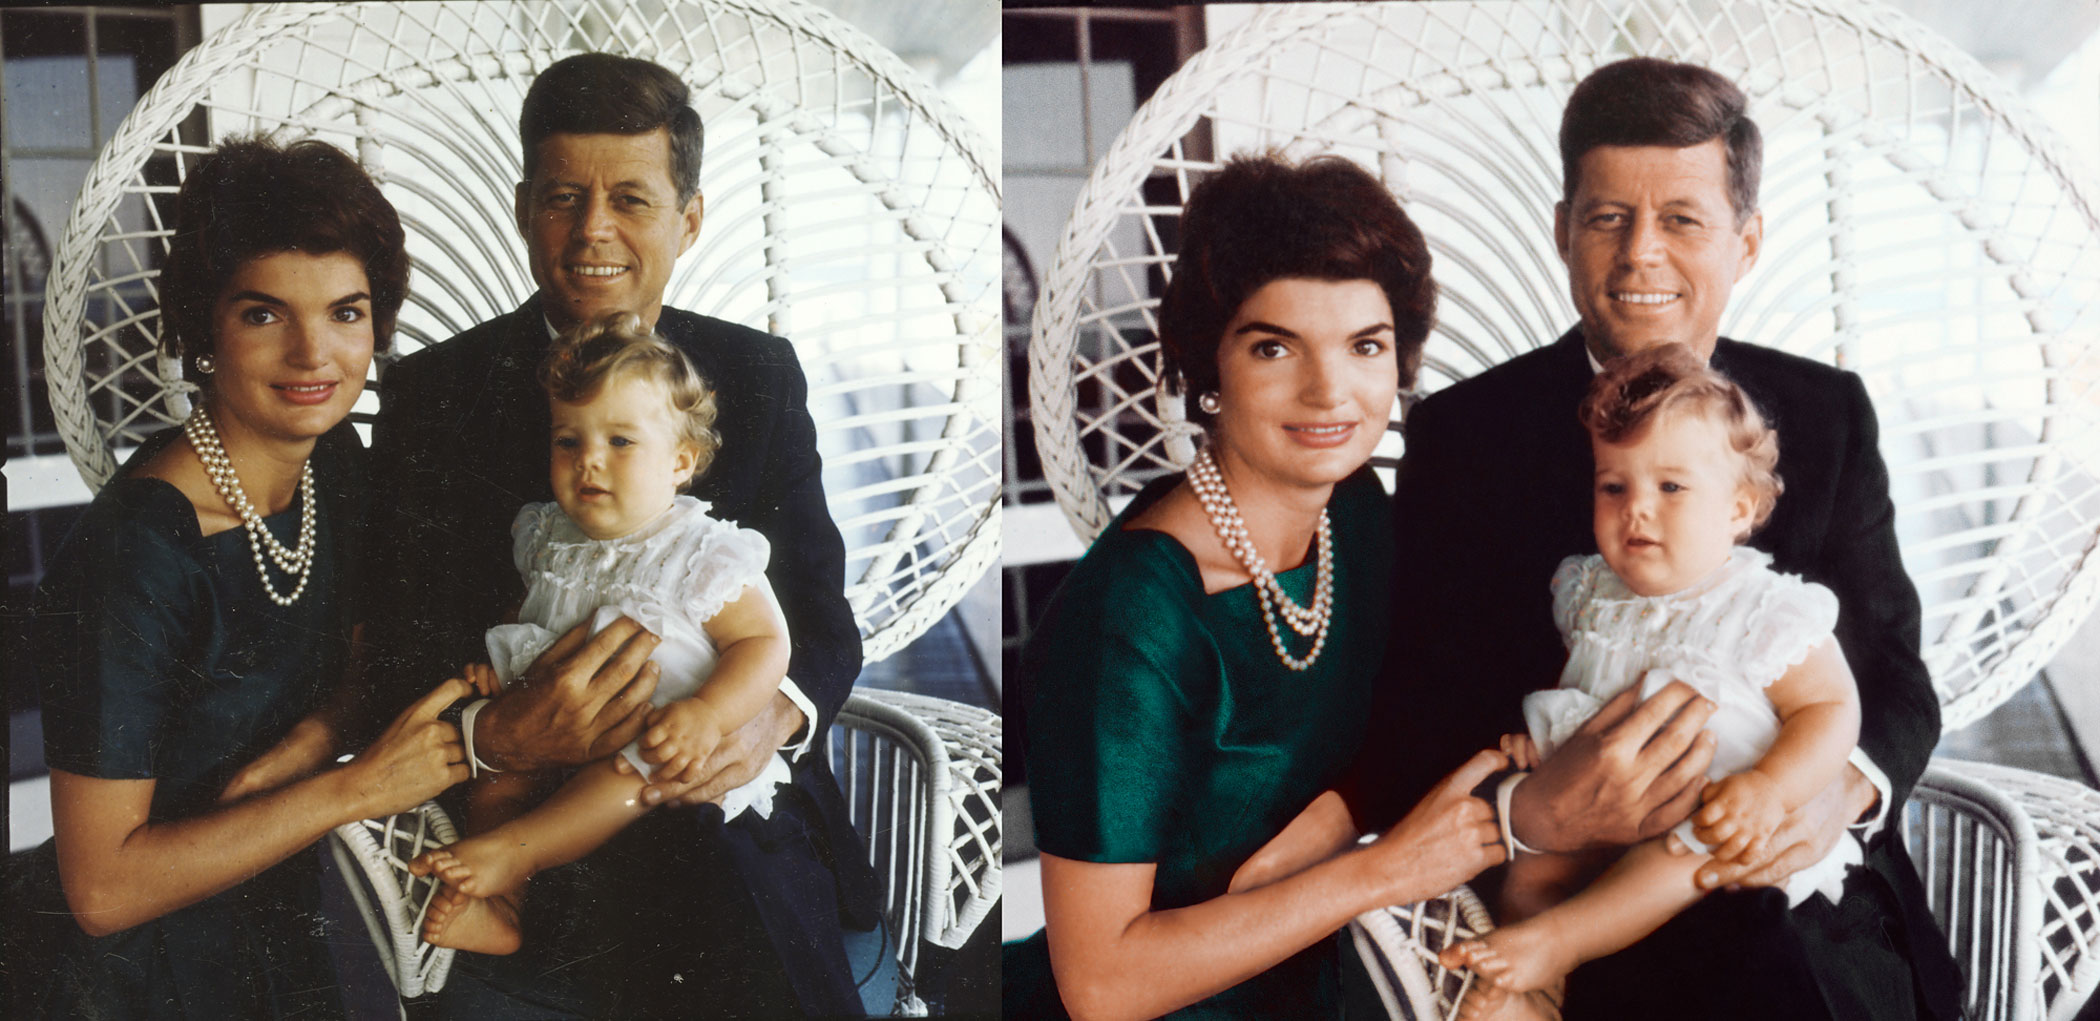 Jacques Lowe captured this portrait of the Kennedys with their daughter, Caroline, during his first session with the family in the summer of 1958. For the exhibit version, at right, the photograph was cleaned and its color was restored.